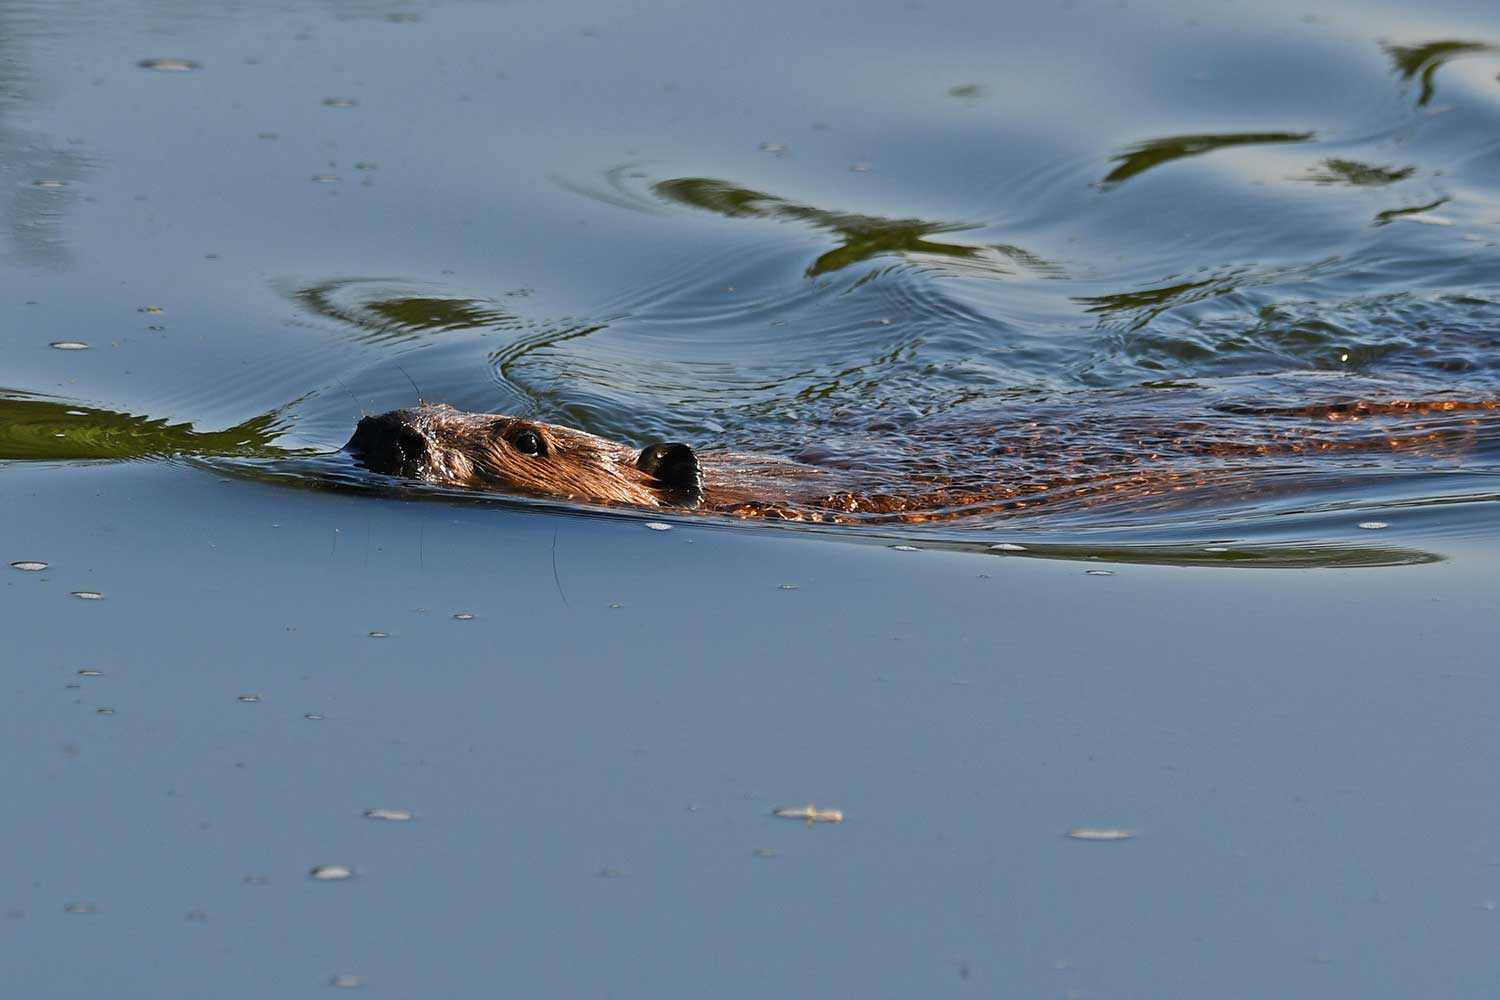 A beaver swimming with just its nose and top of its head above water.